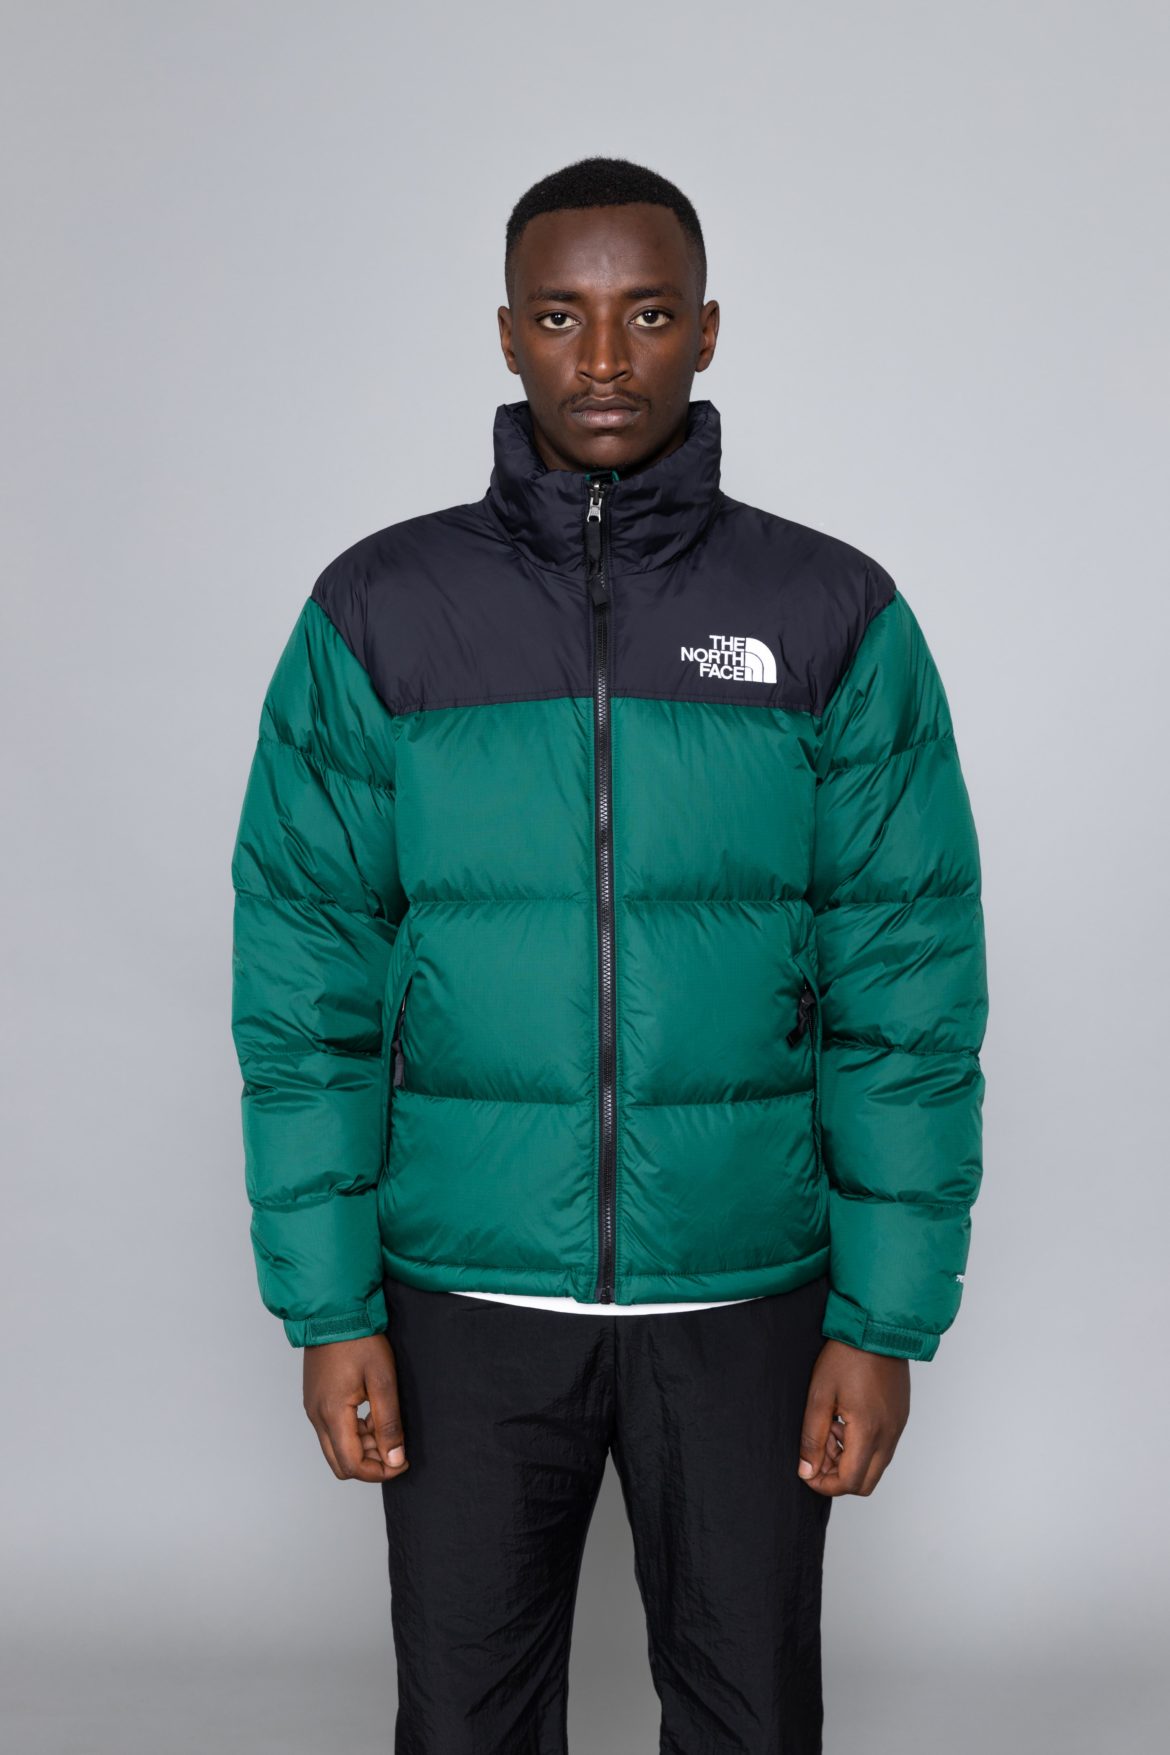 the north face jacket deals